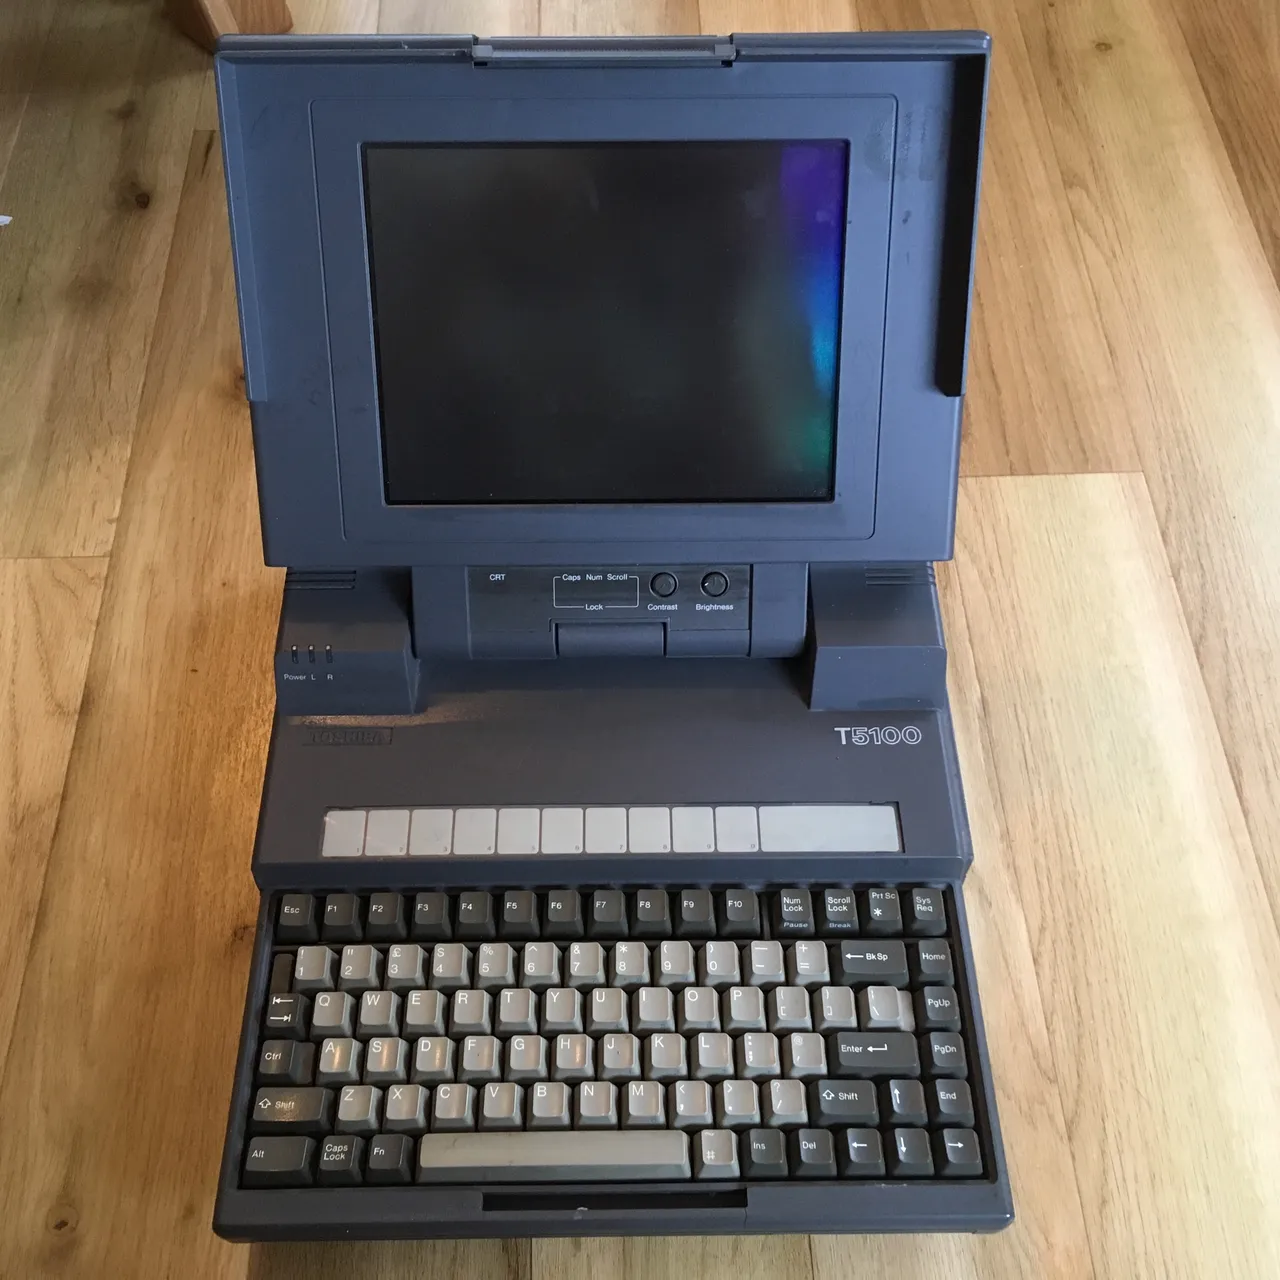 Opened view of a Toshiba T5100, you can see the keyboard and screen. It's not powered on